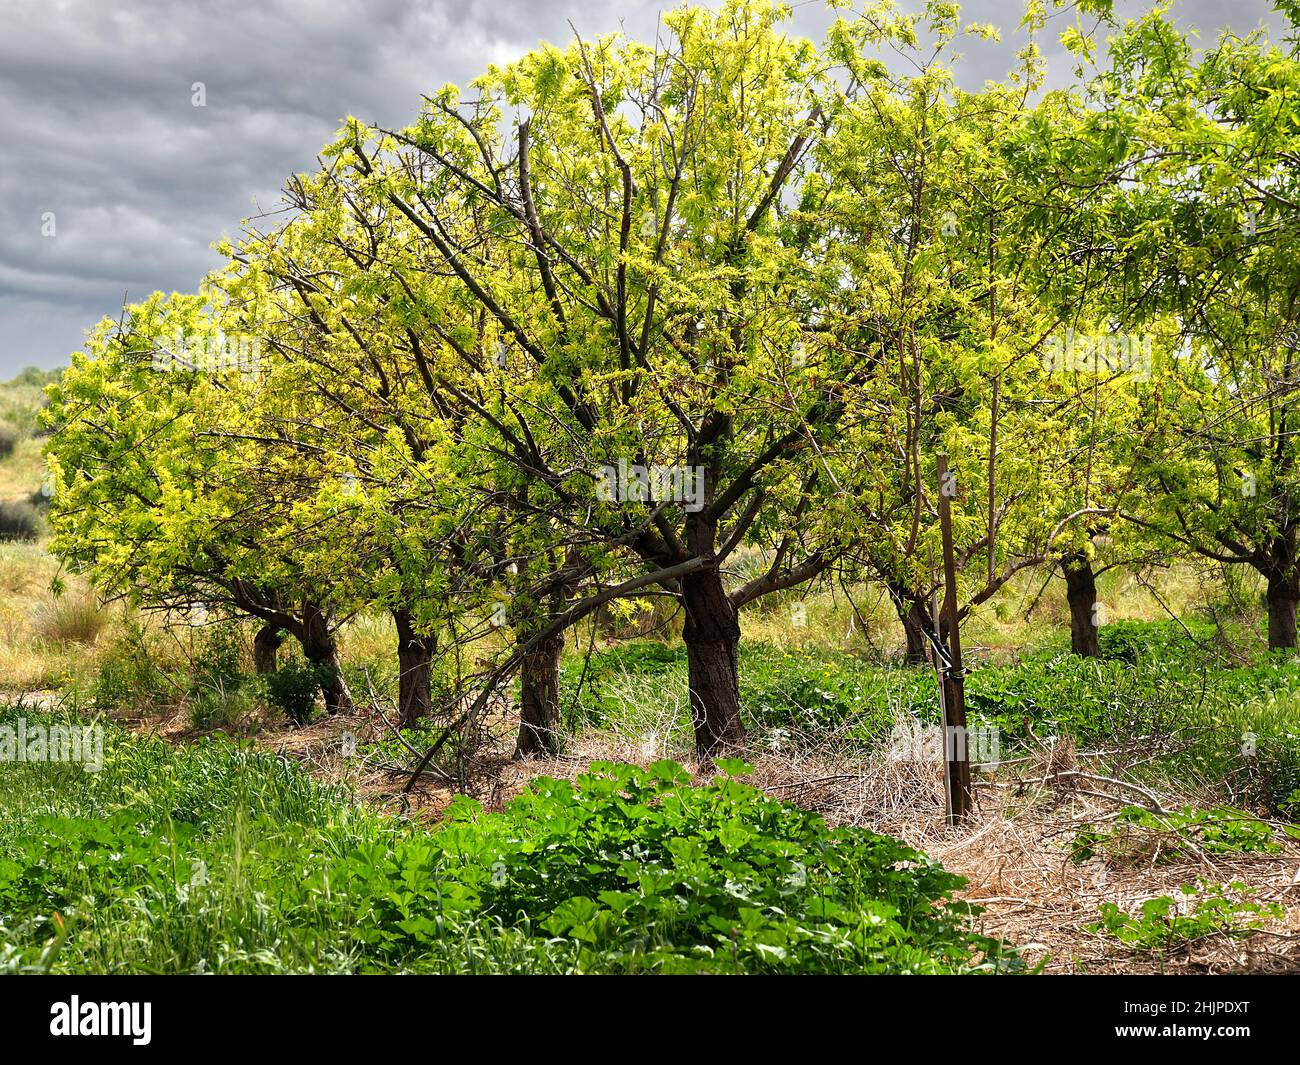 Almond trees on a cloudy day. Israeli agriculture. Stock Photo